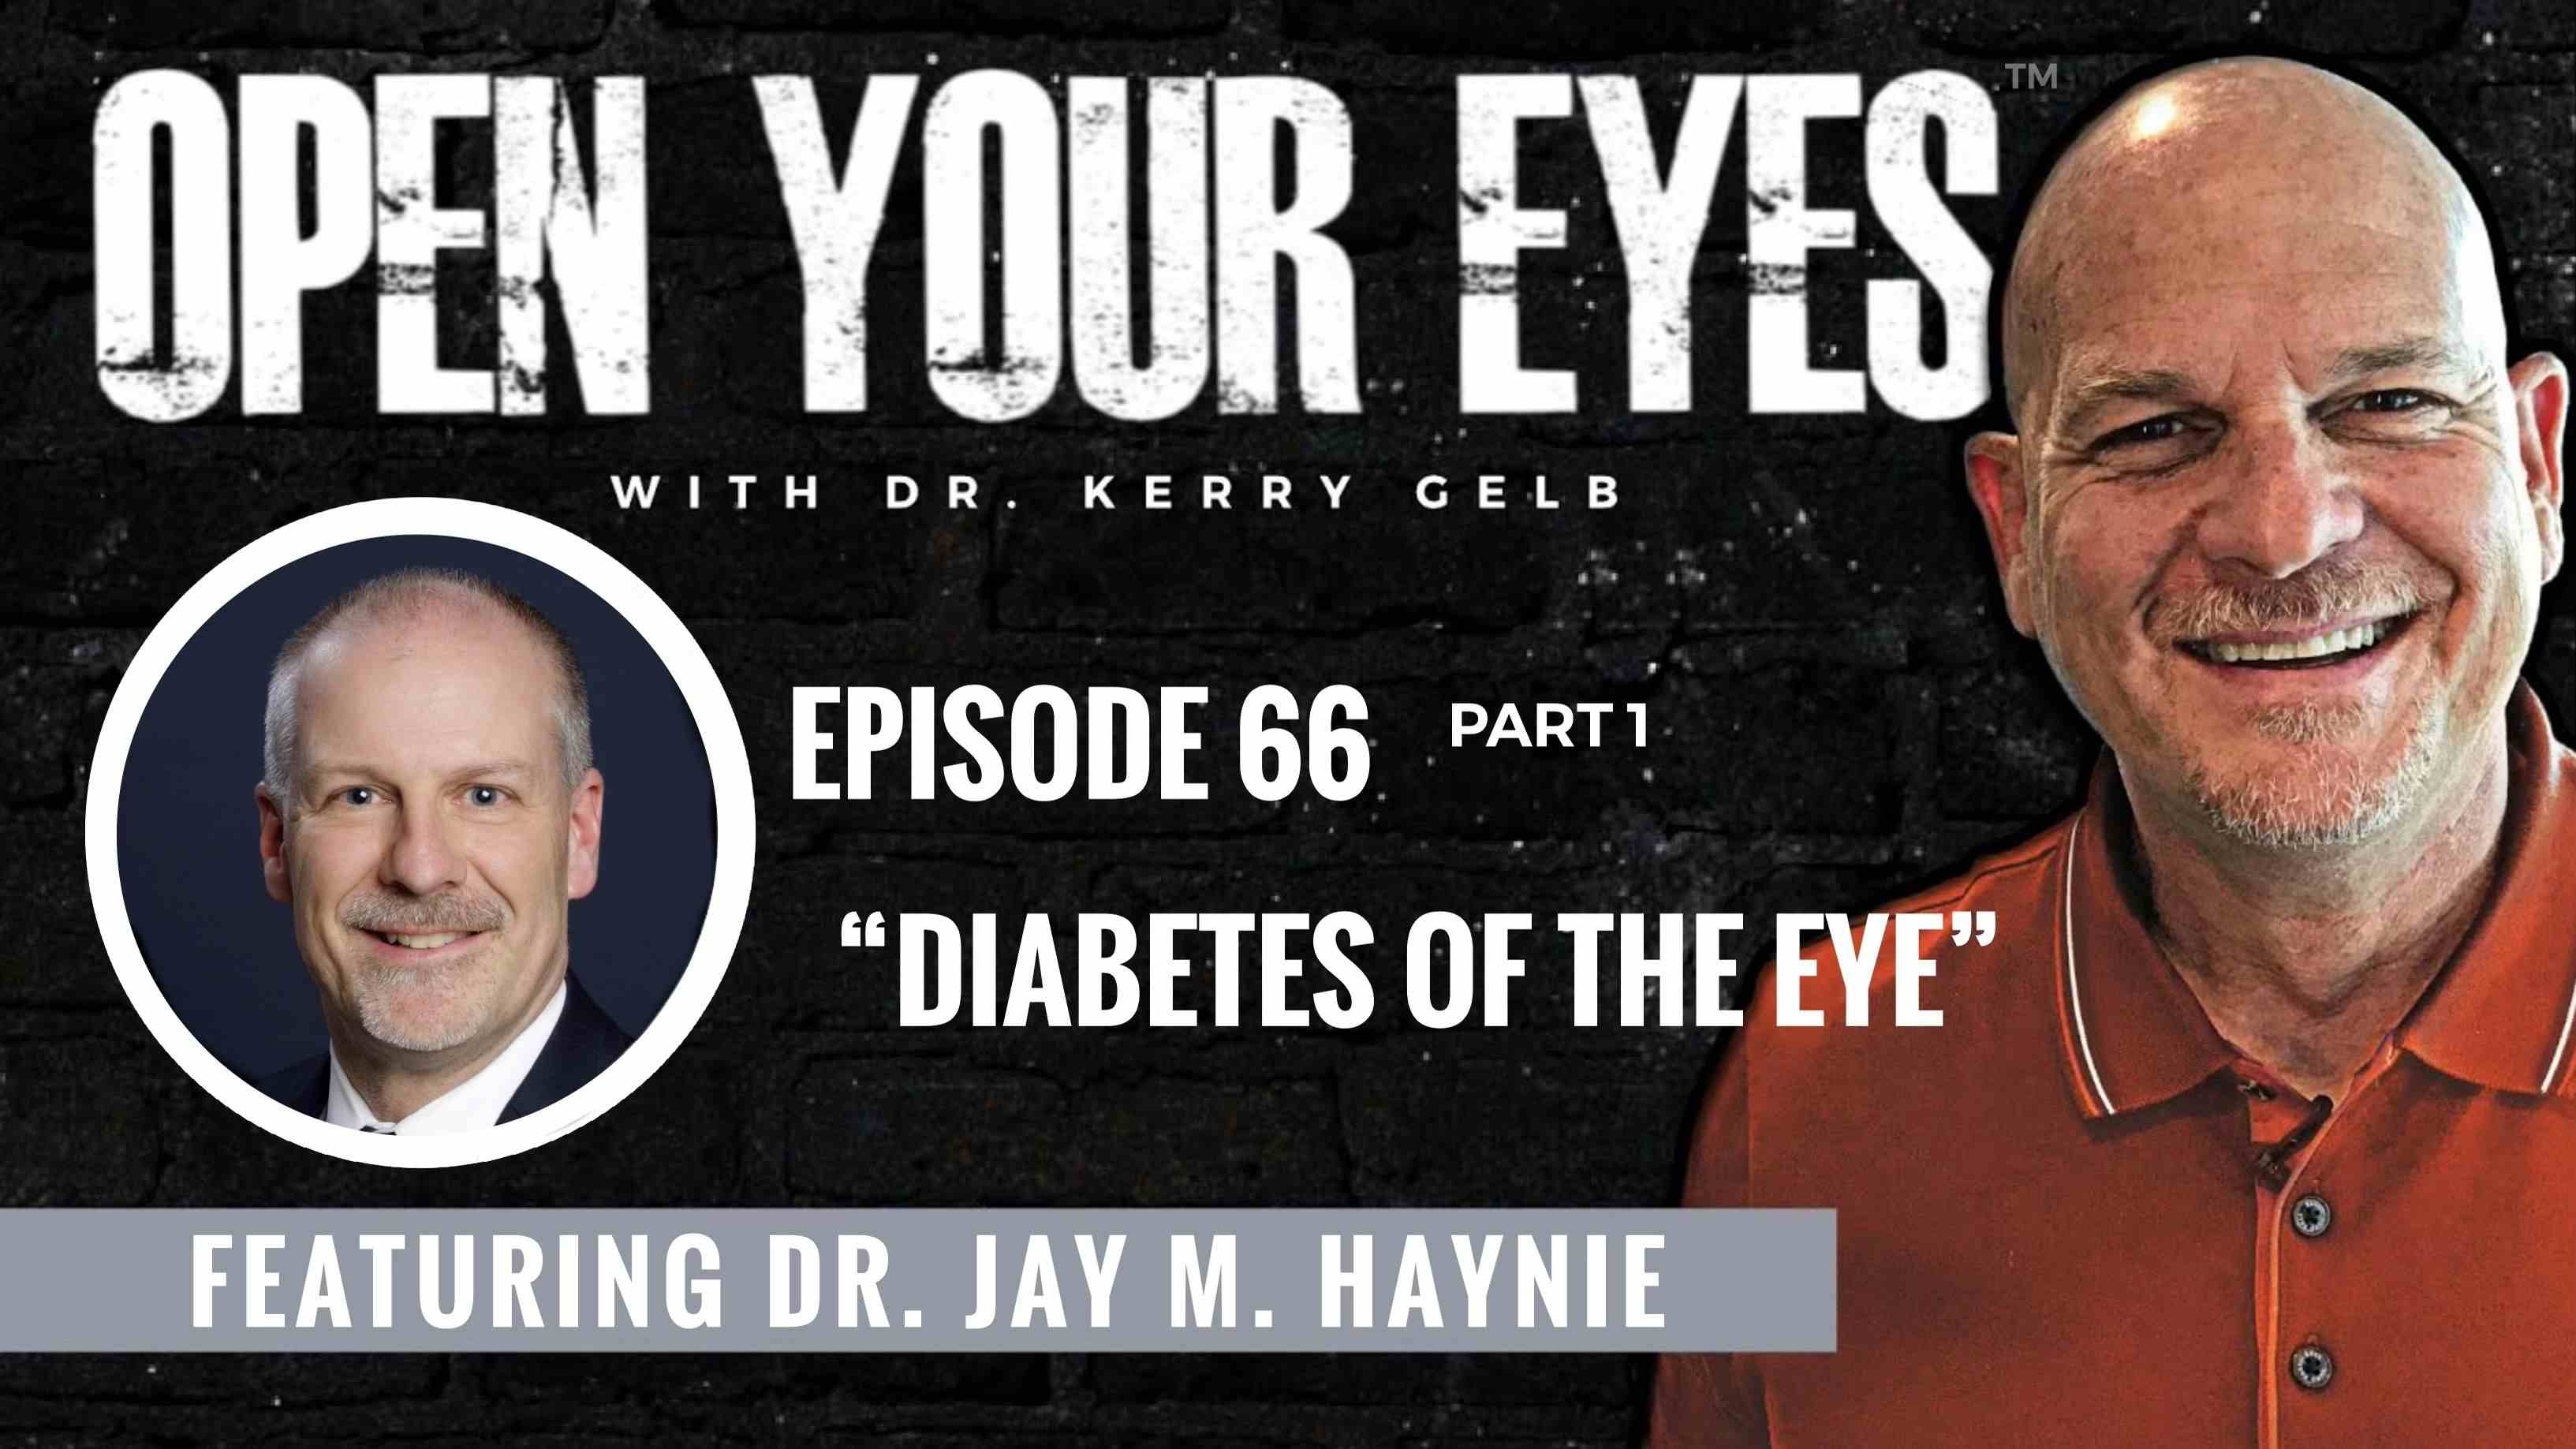 Open Your Eyes with Dr Kerry Gelb featuring Dr. Jay Haynie in "diabetes of the eye"